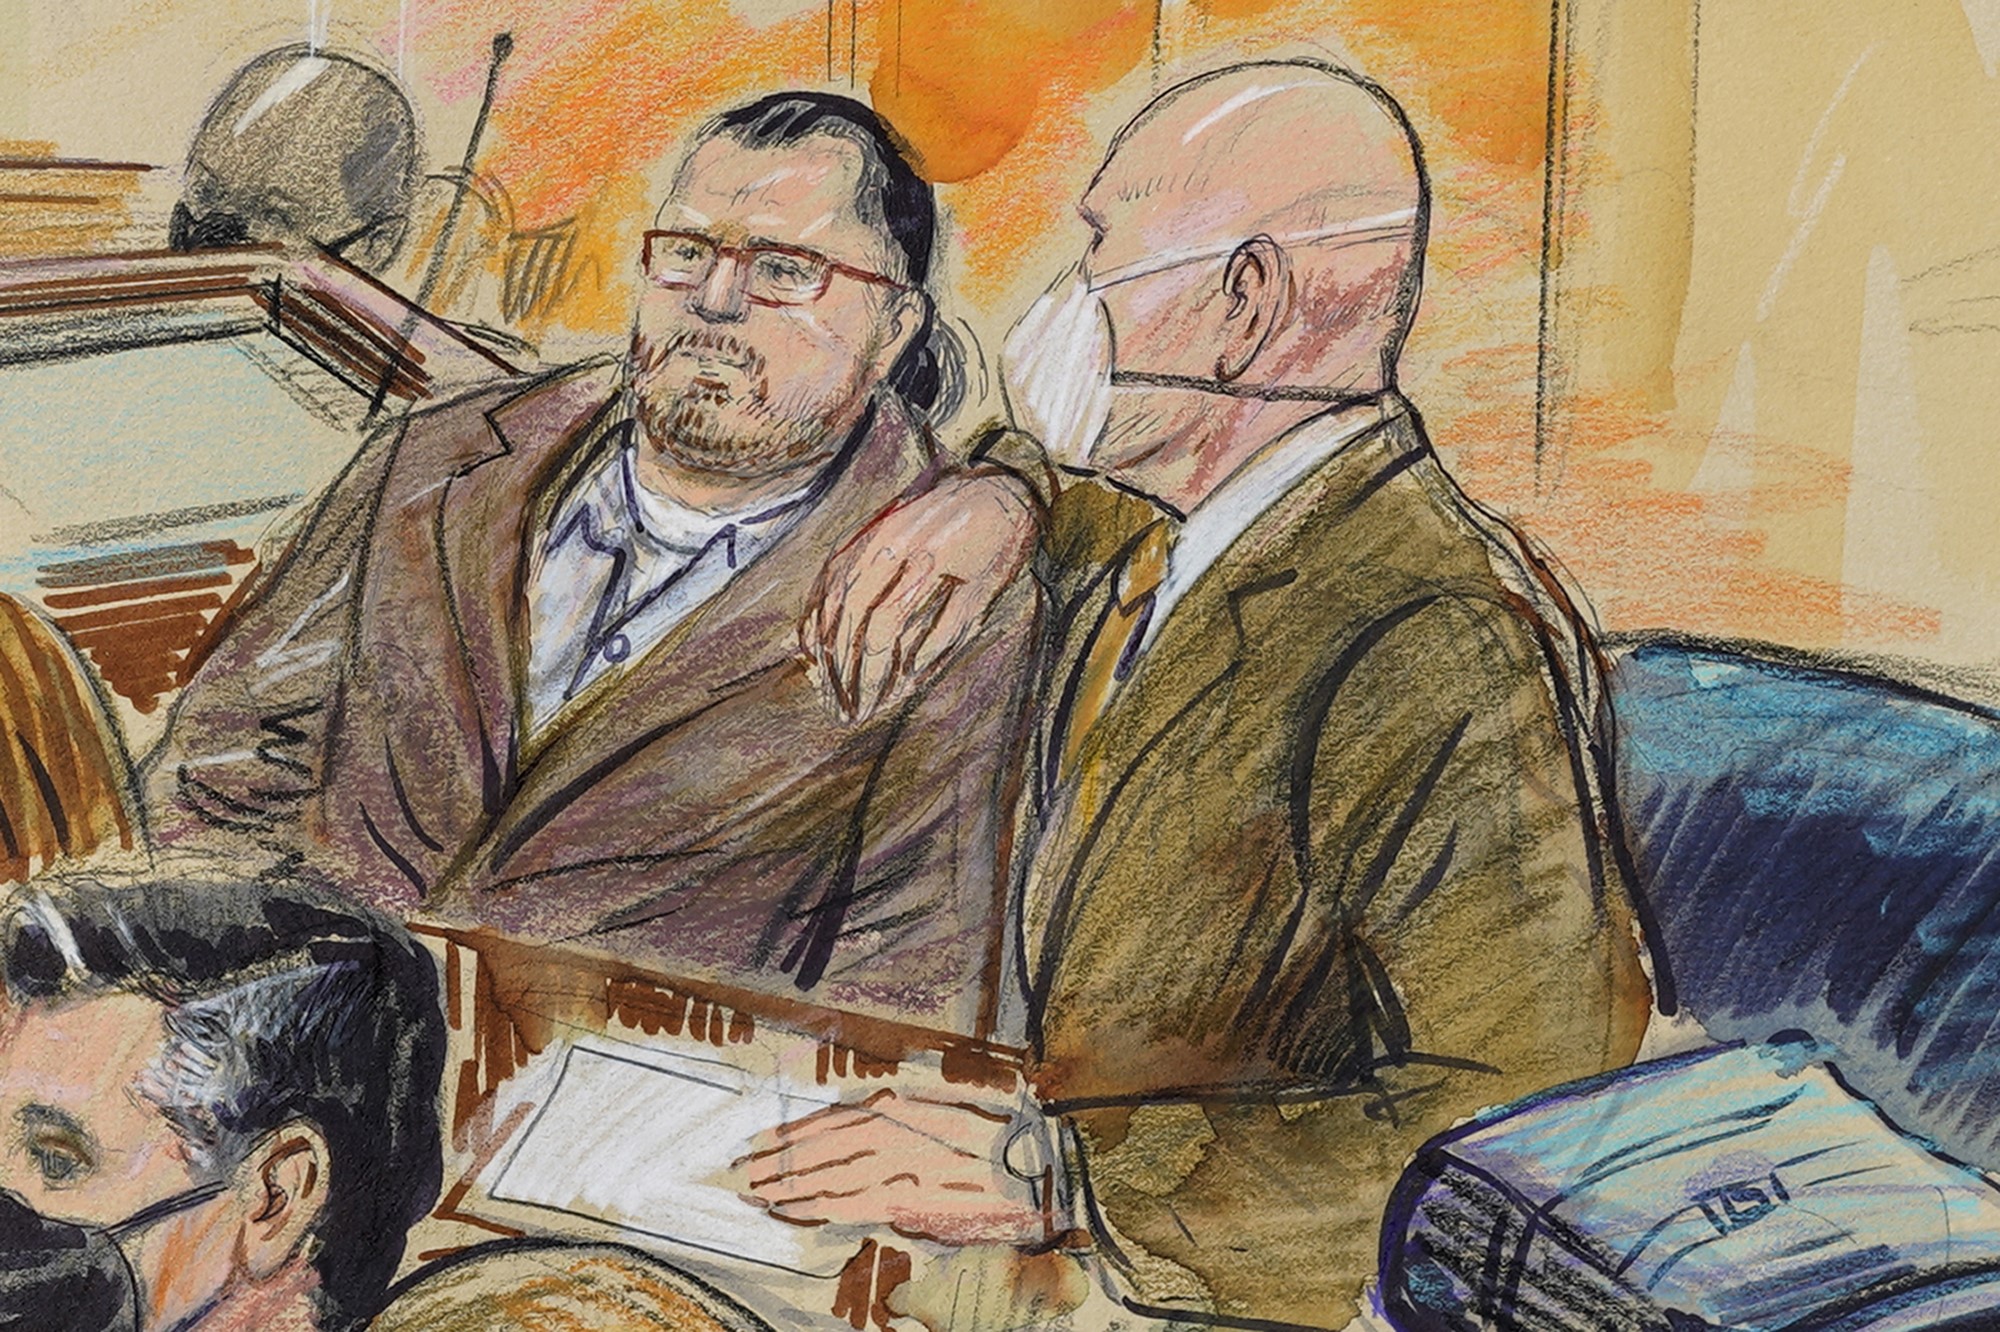 A courtroom sketch of Guy Wesley Reffitt, joined by his lawyer William Welch, right.